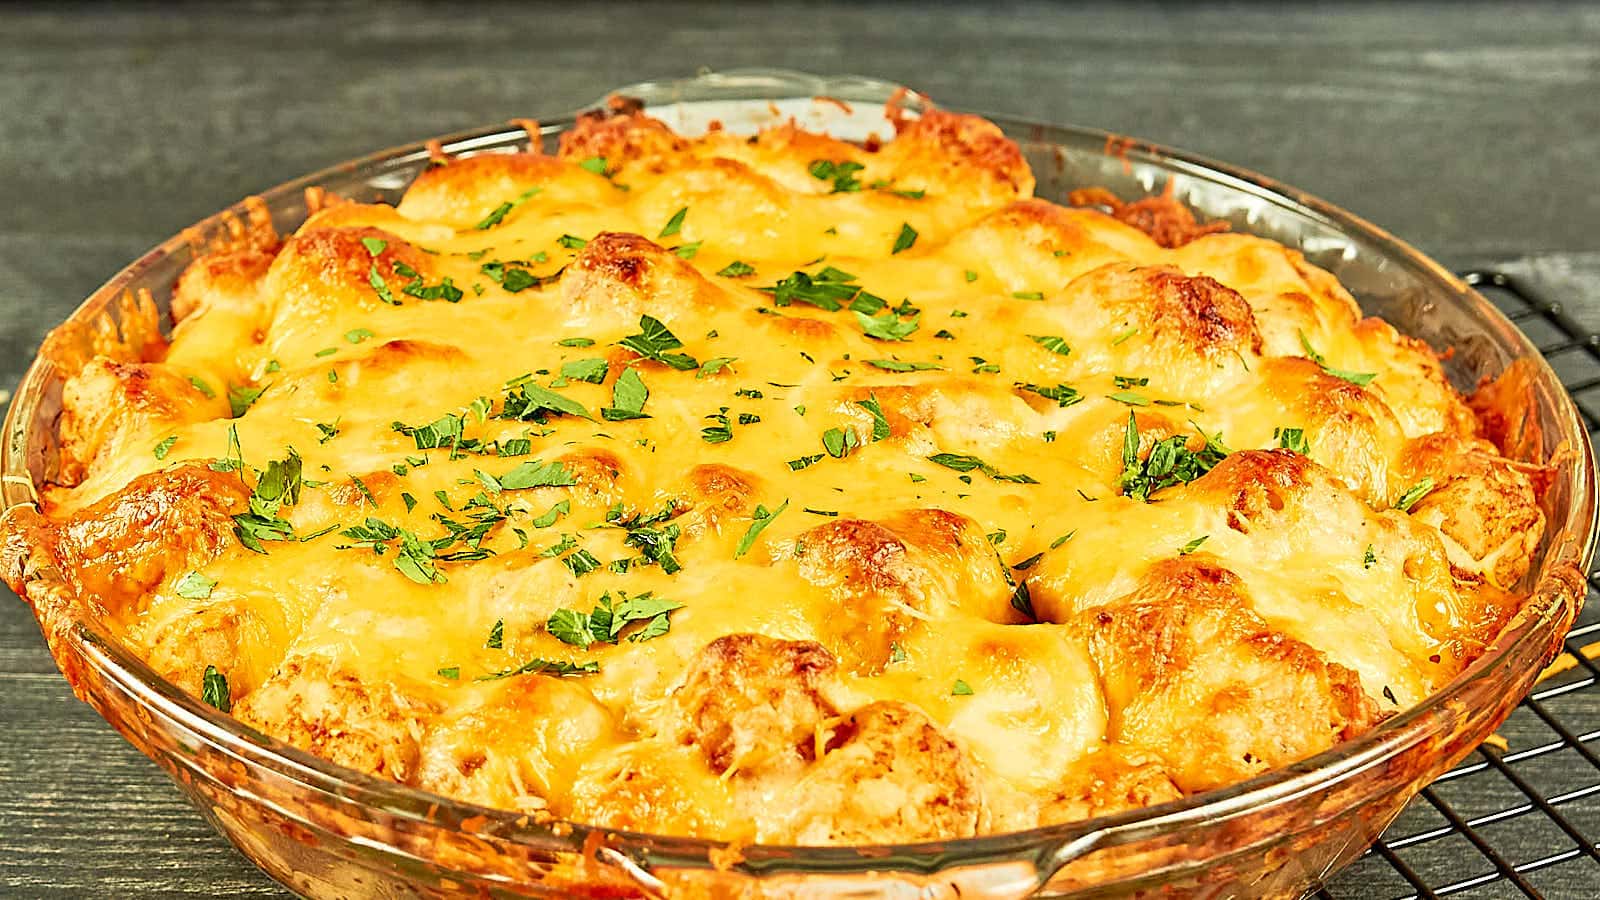 Tater Tot Turkey Casserole recipe by Cheerful Cook.